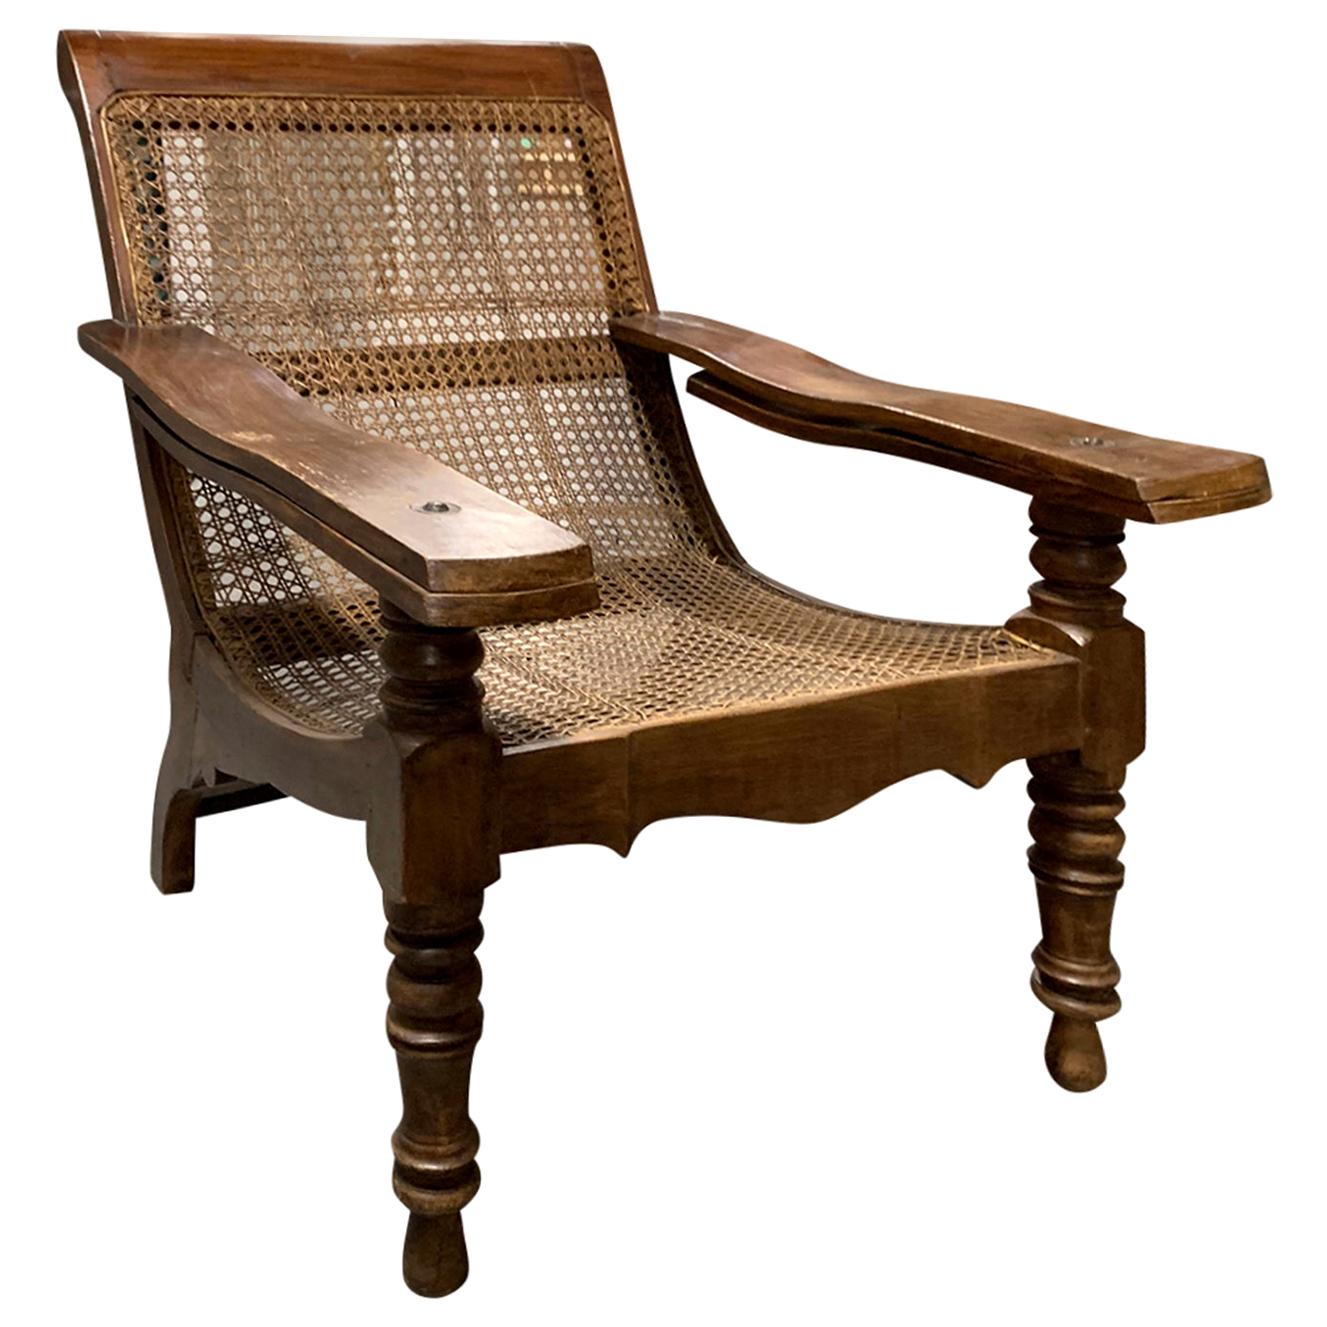 19th-Early 20th Century Anglo-Caribbean Caned Planters Chair with Leg Stretchers